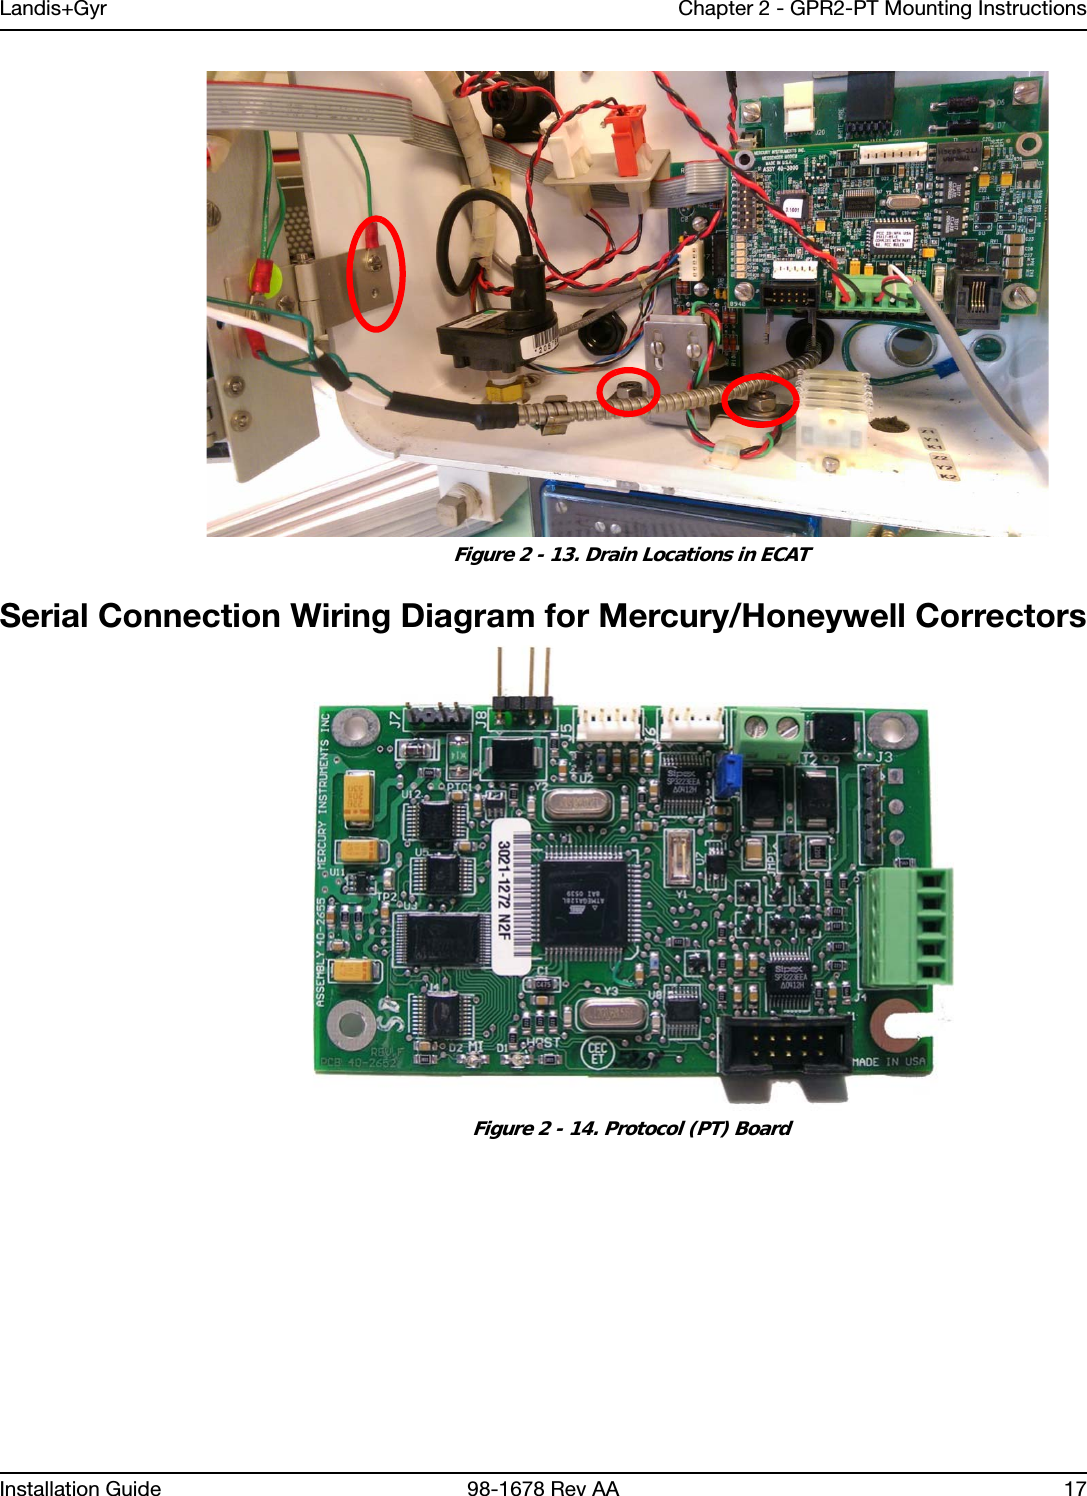 Landis+Gyr Chapter 2 - GPR2-PT Mounting InstructionsInstallation Guide 98-1678 Rev AA 17 Figure 2 - 13. Drain Locations in ECATSerial Connection Wiring Diagram for Mercury/Honeywell Correctors Figure 2 - 14. Protocol (PT) Board